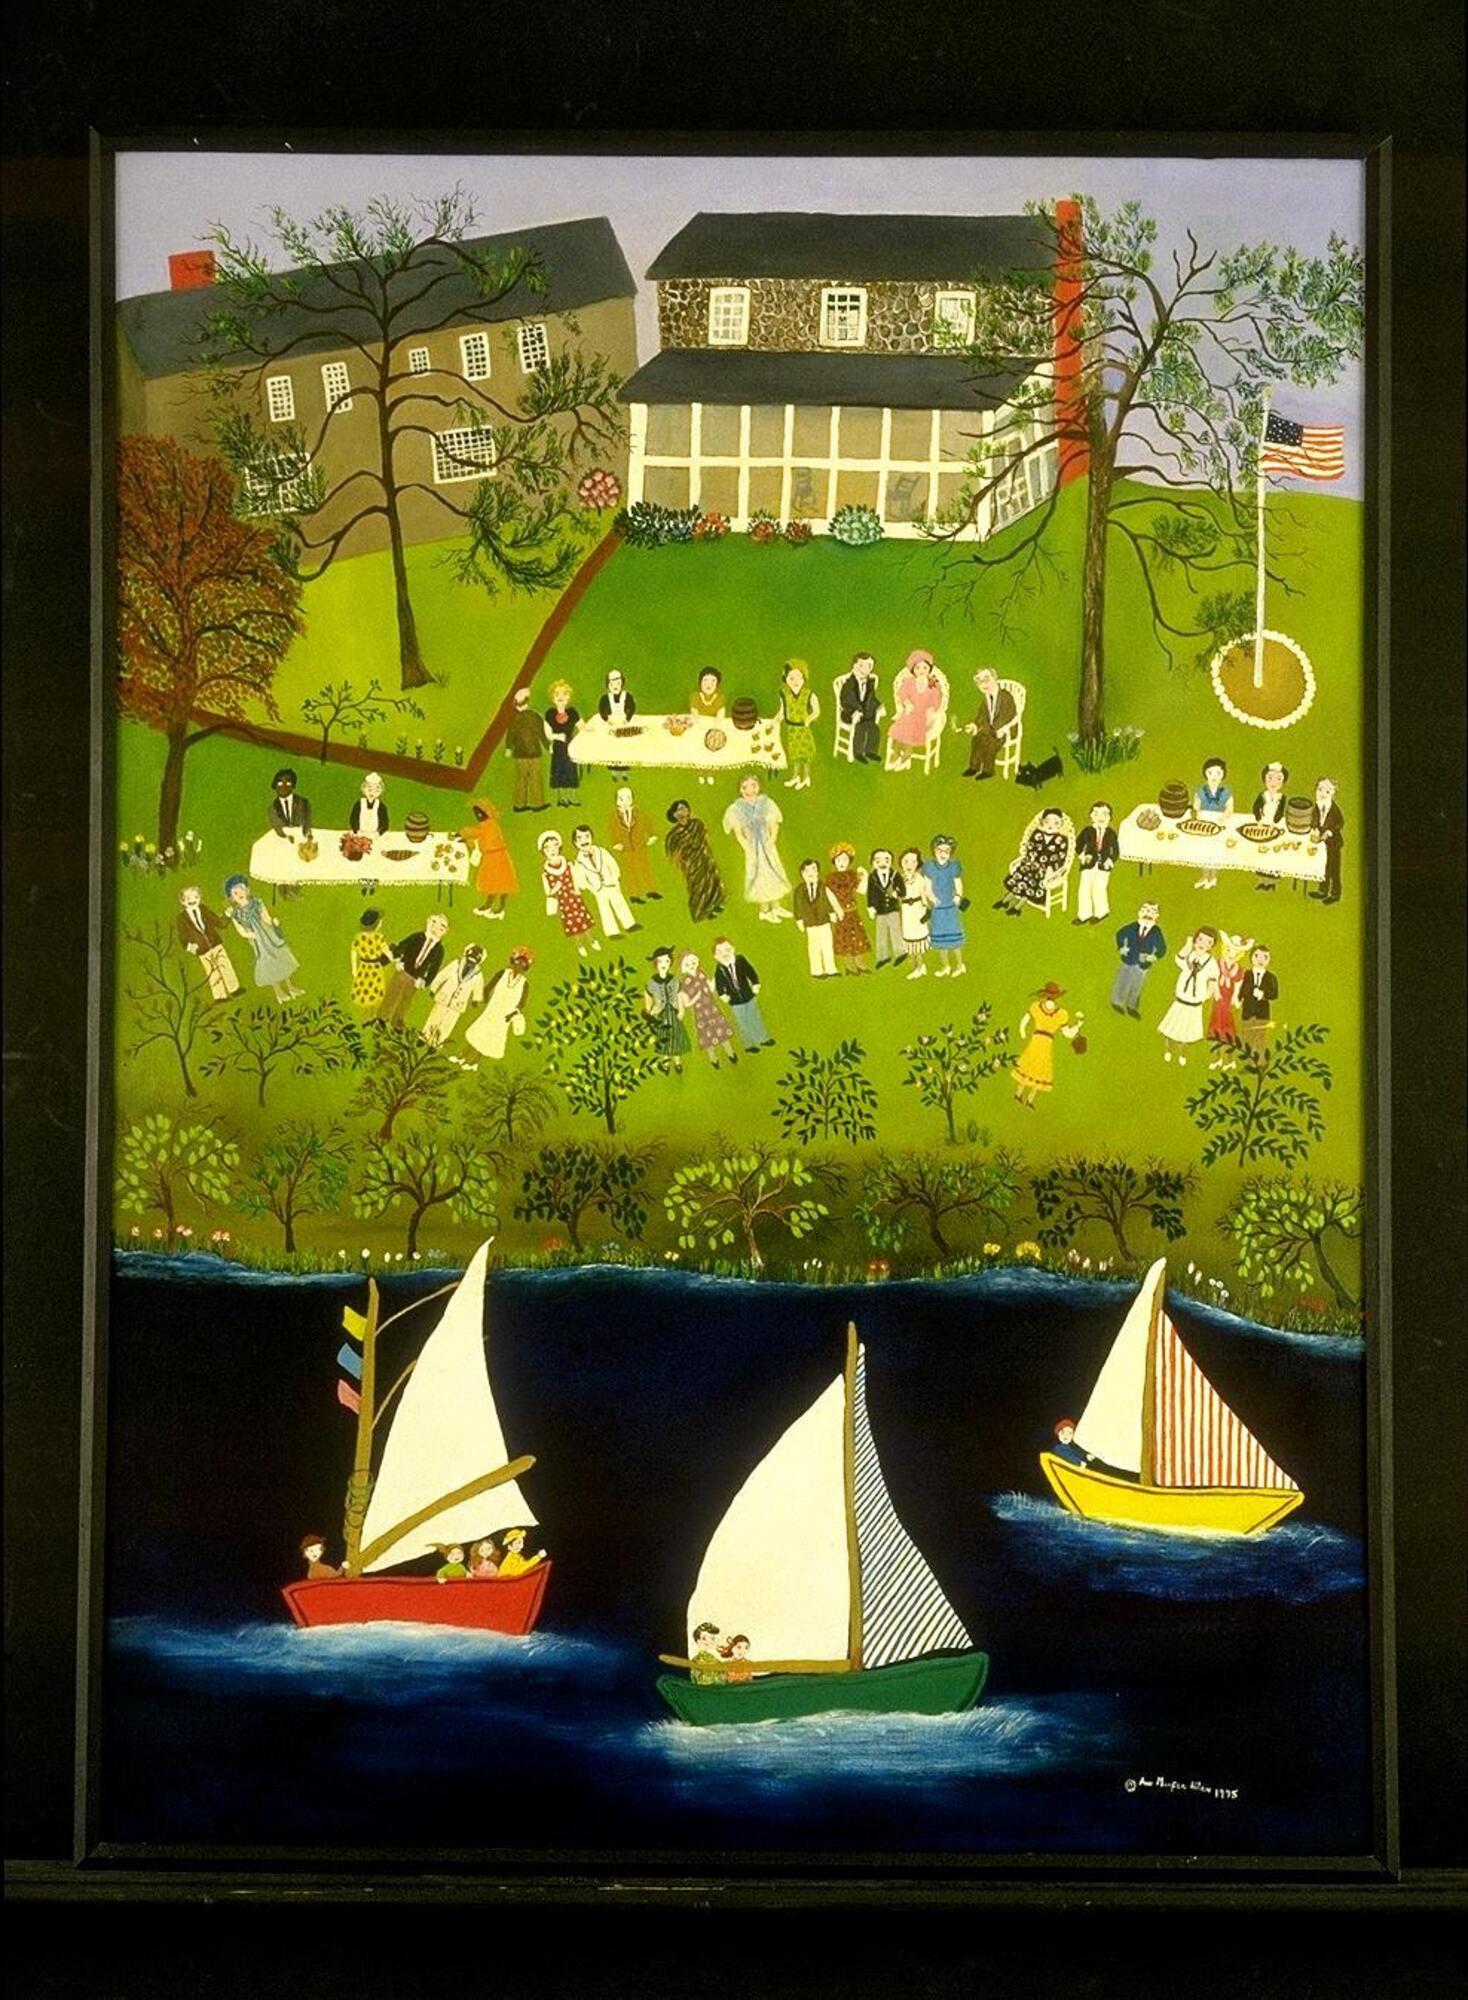 Primitive painting depicting three sailboats in the foreground, and figures sitting around tables and standing on a lawn in the middle ground, with two houses in the background.<br />